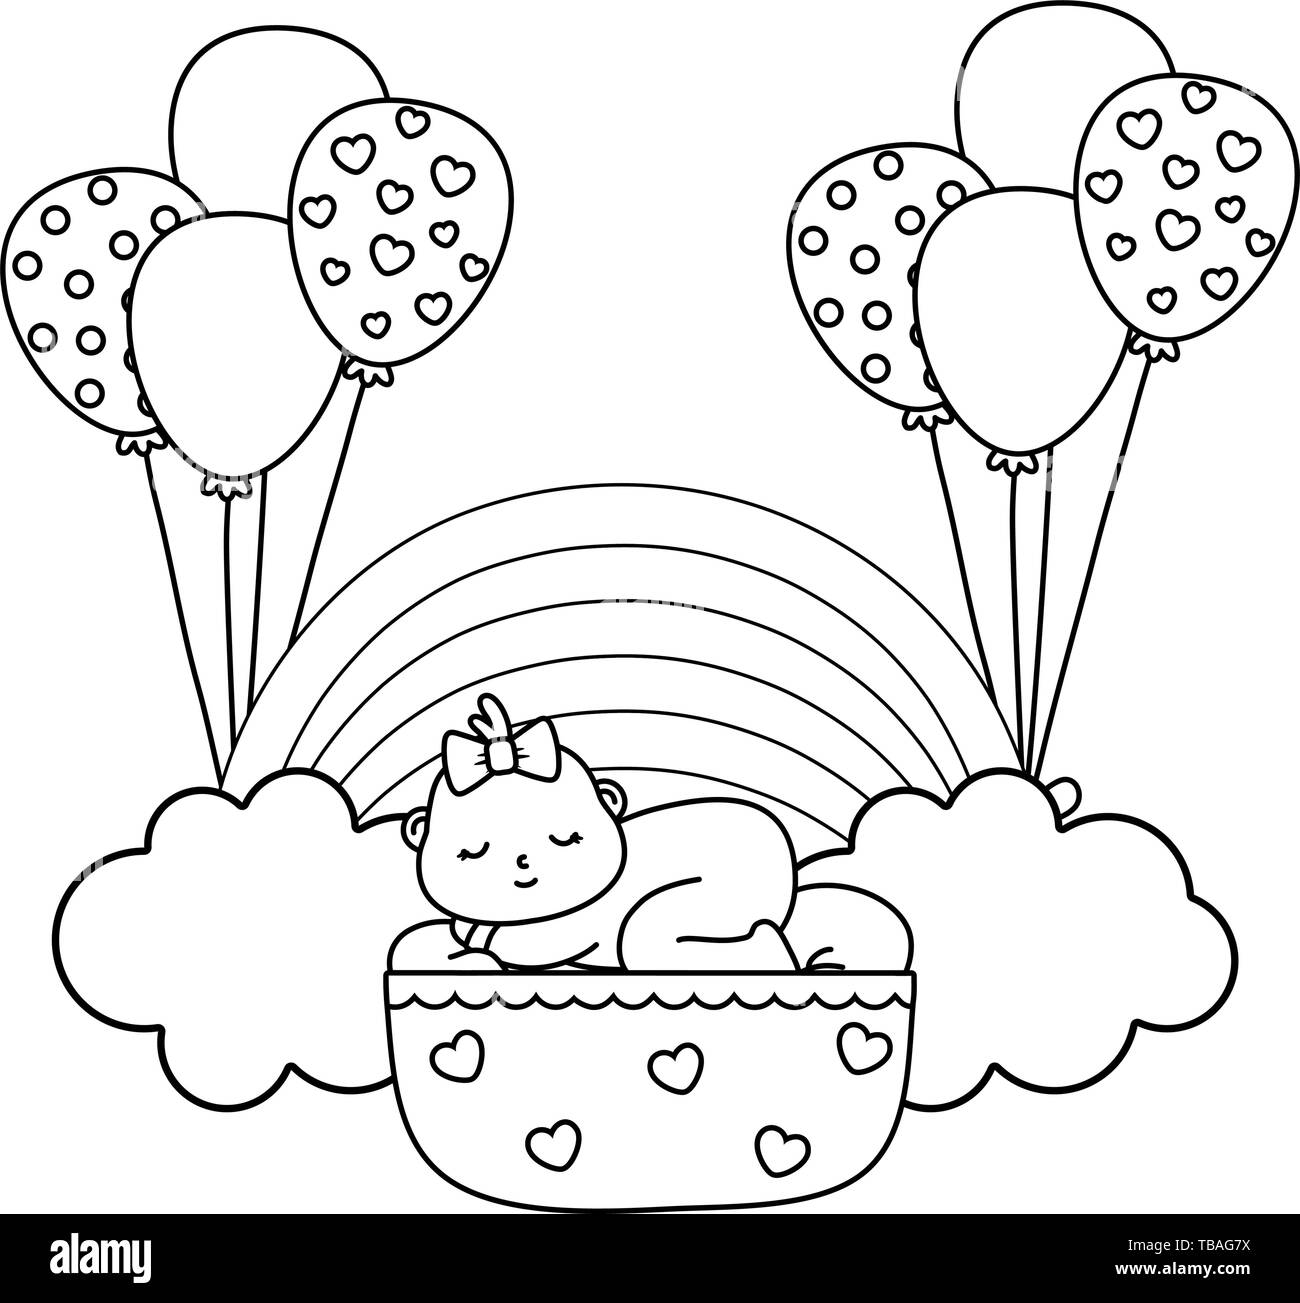 baby sleeping in a cradle hanging from balloons with clouds and rainbow vector illustration graphic design Stock Vector